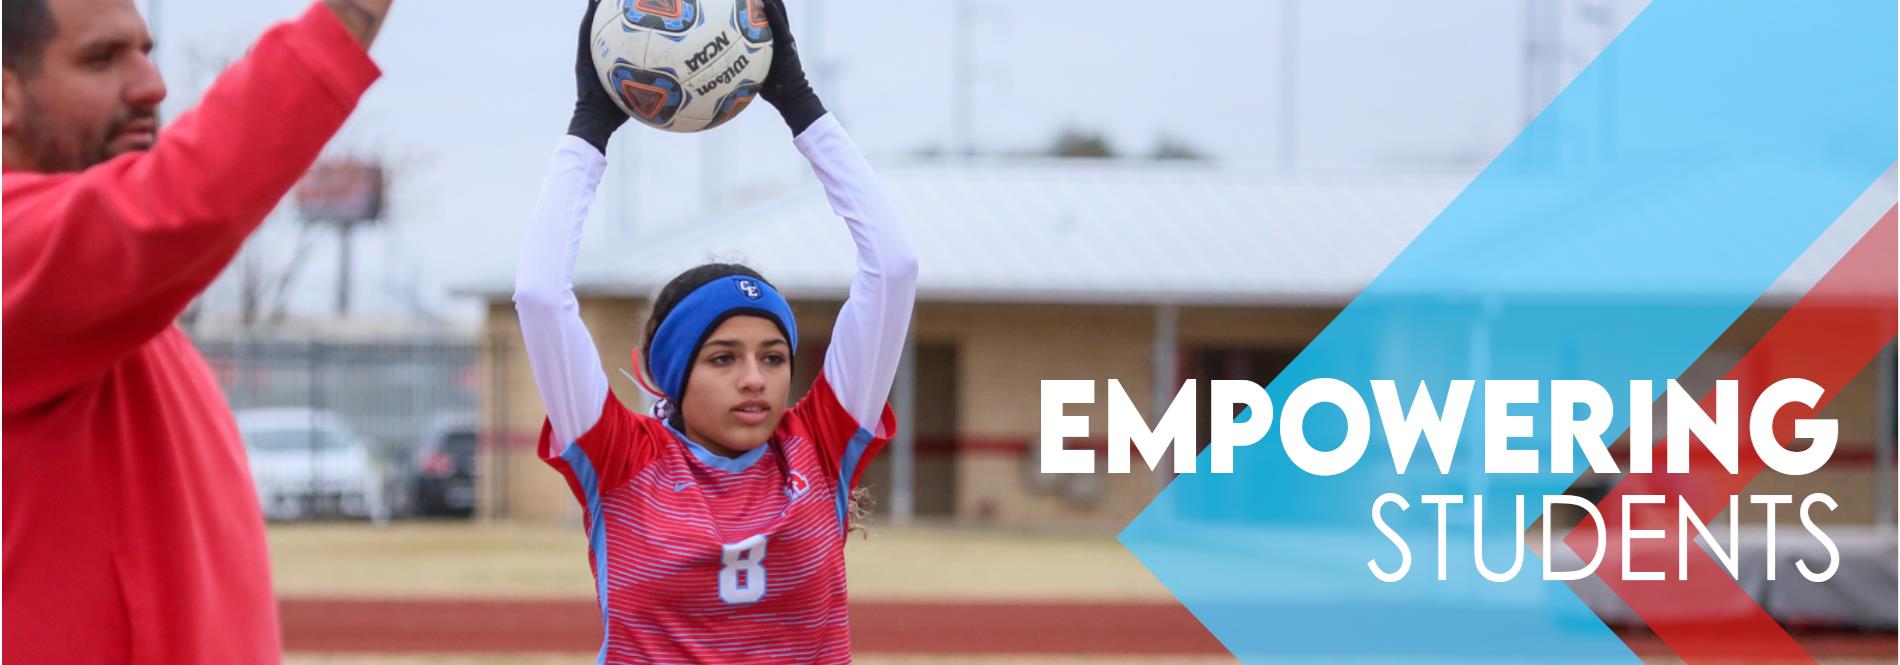 Girls Soccer - Empowering Students